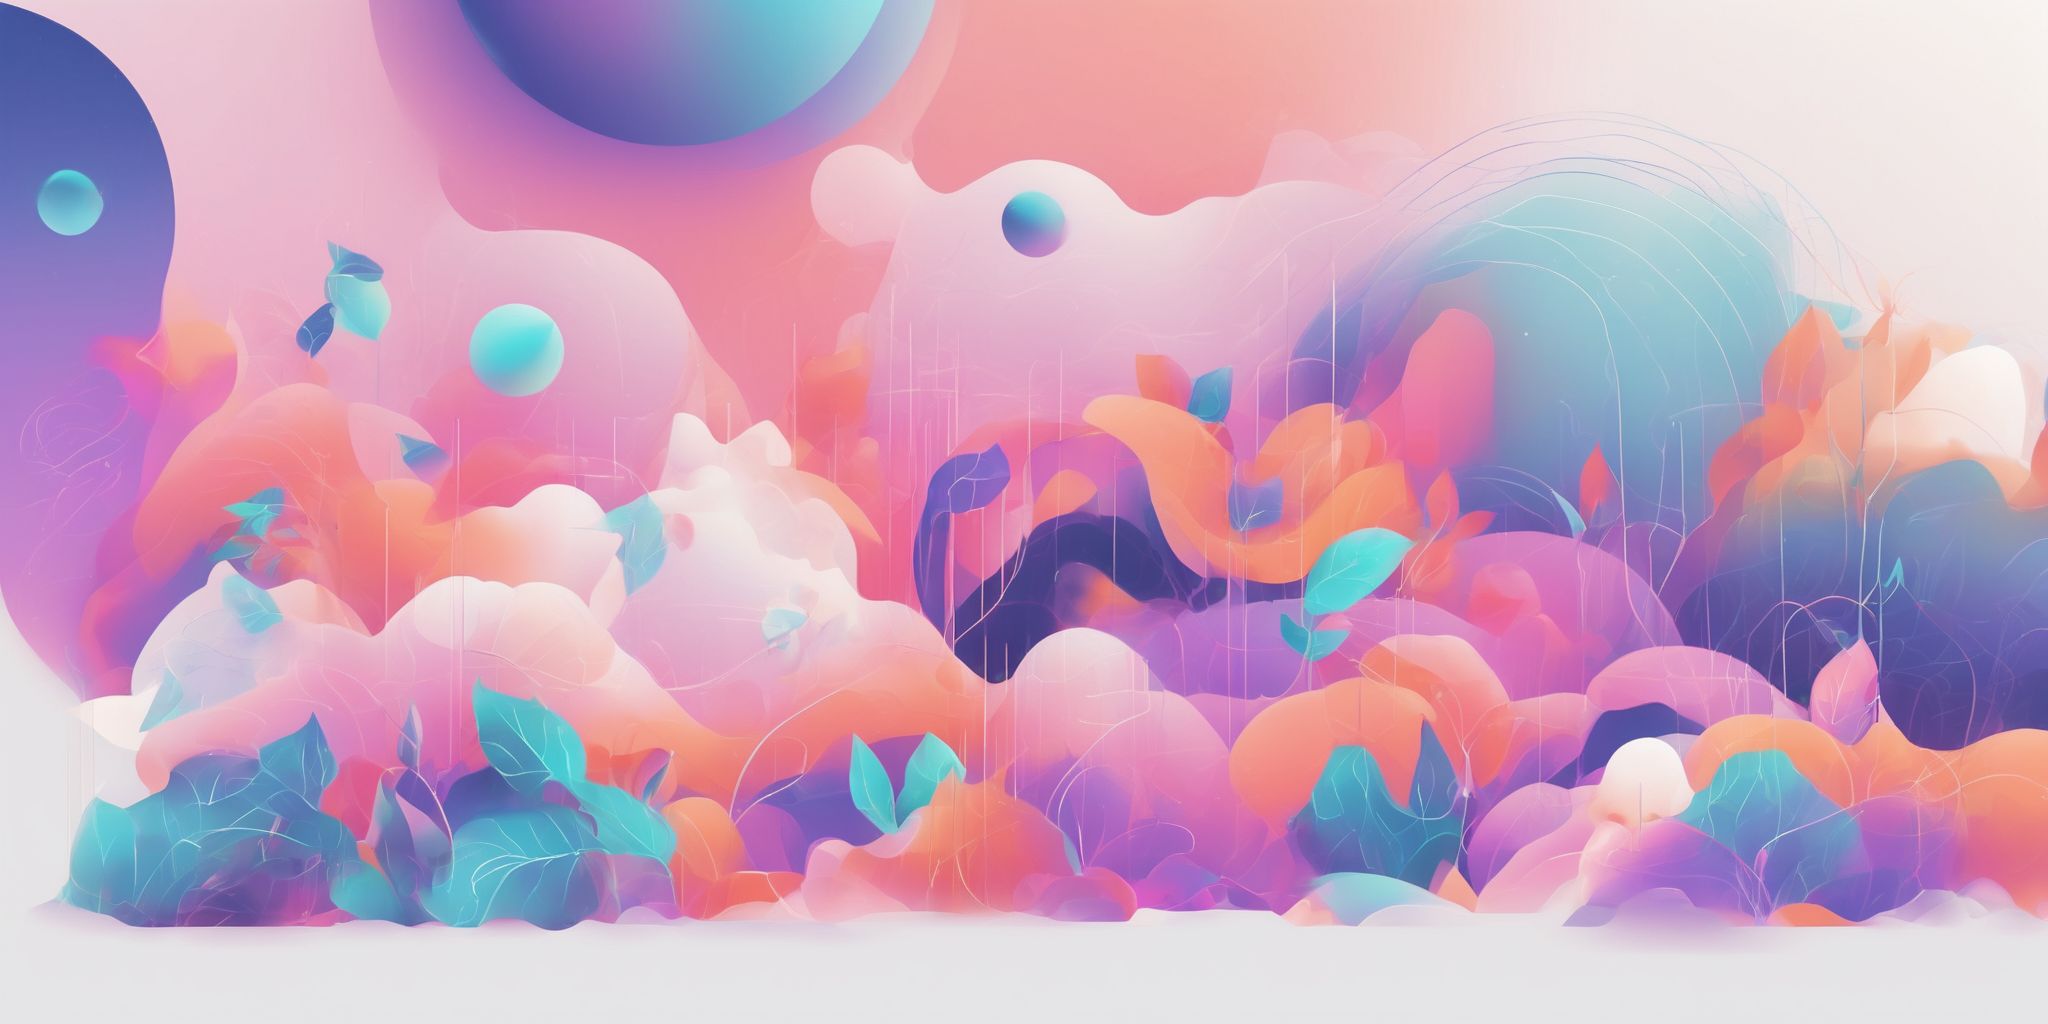 Visuals in illustration style with gradients and white background